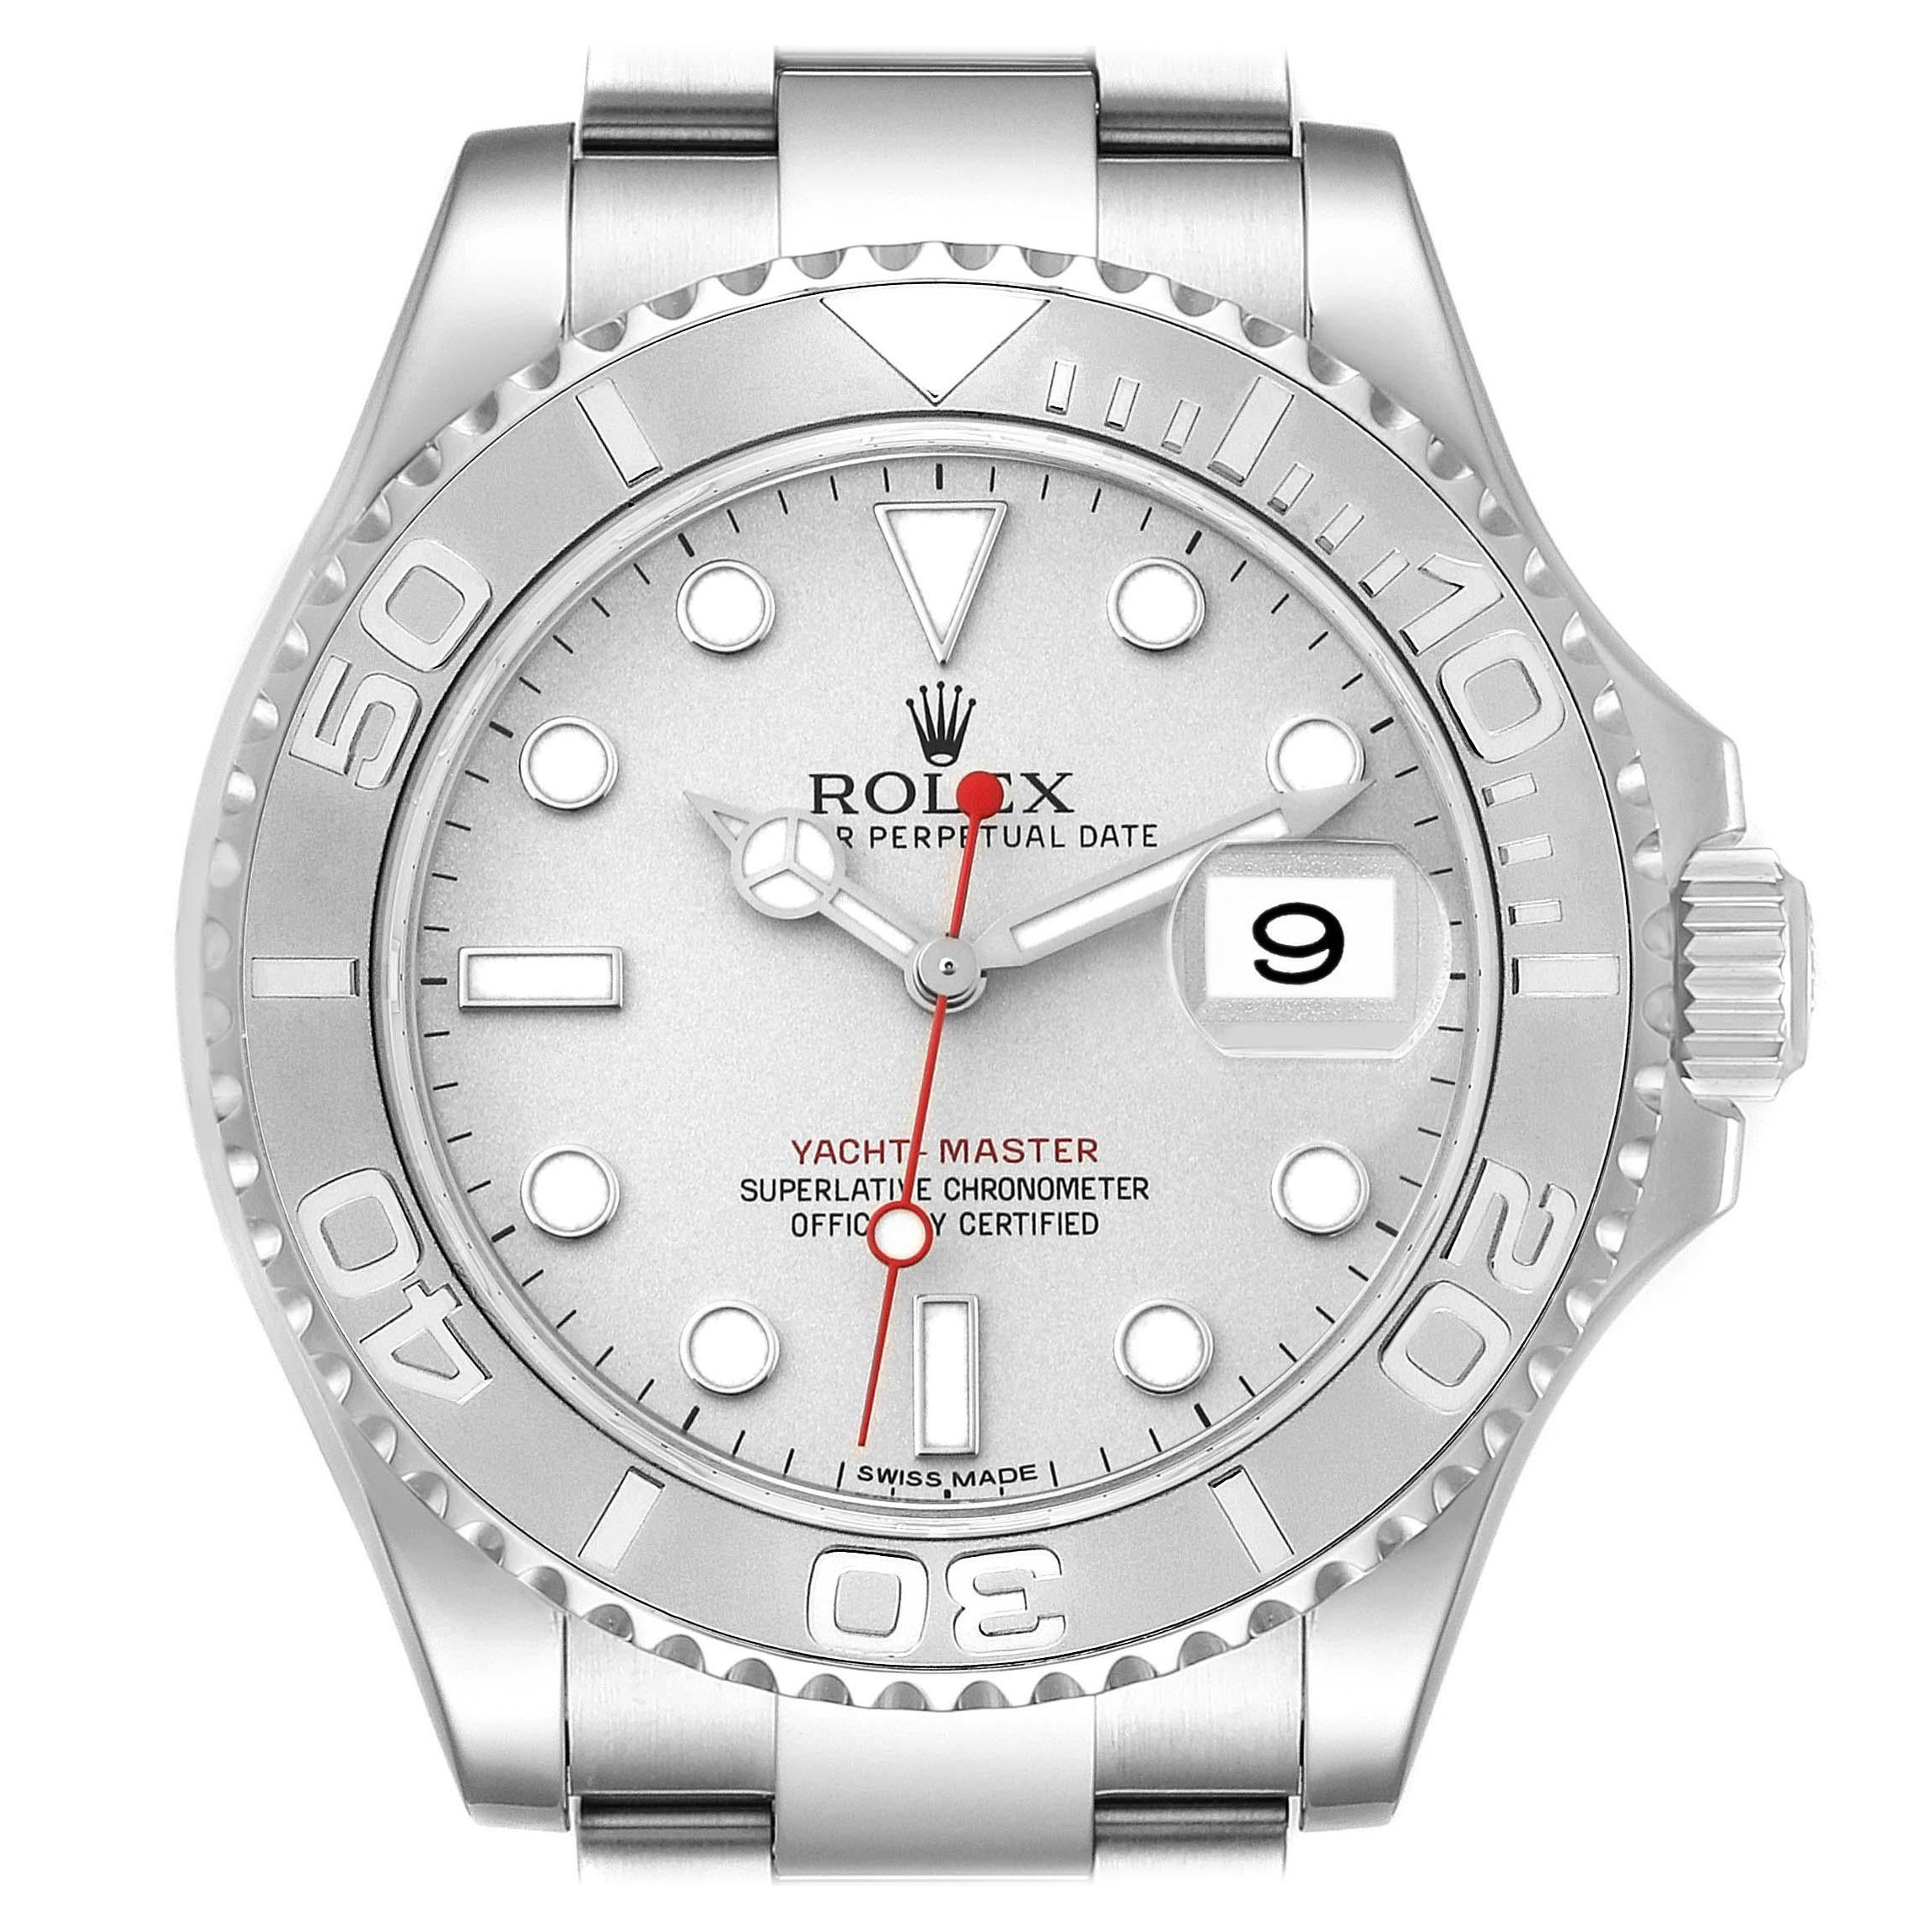 Rolex Yachtmaster Platinum Dial Steel Mens Watch 116622 Box Card For Sale